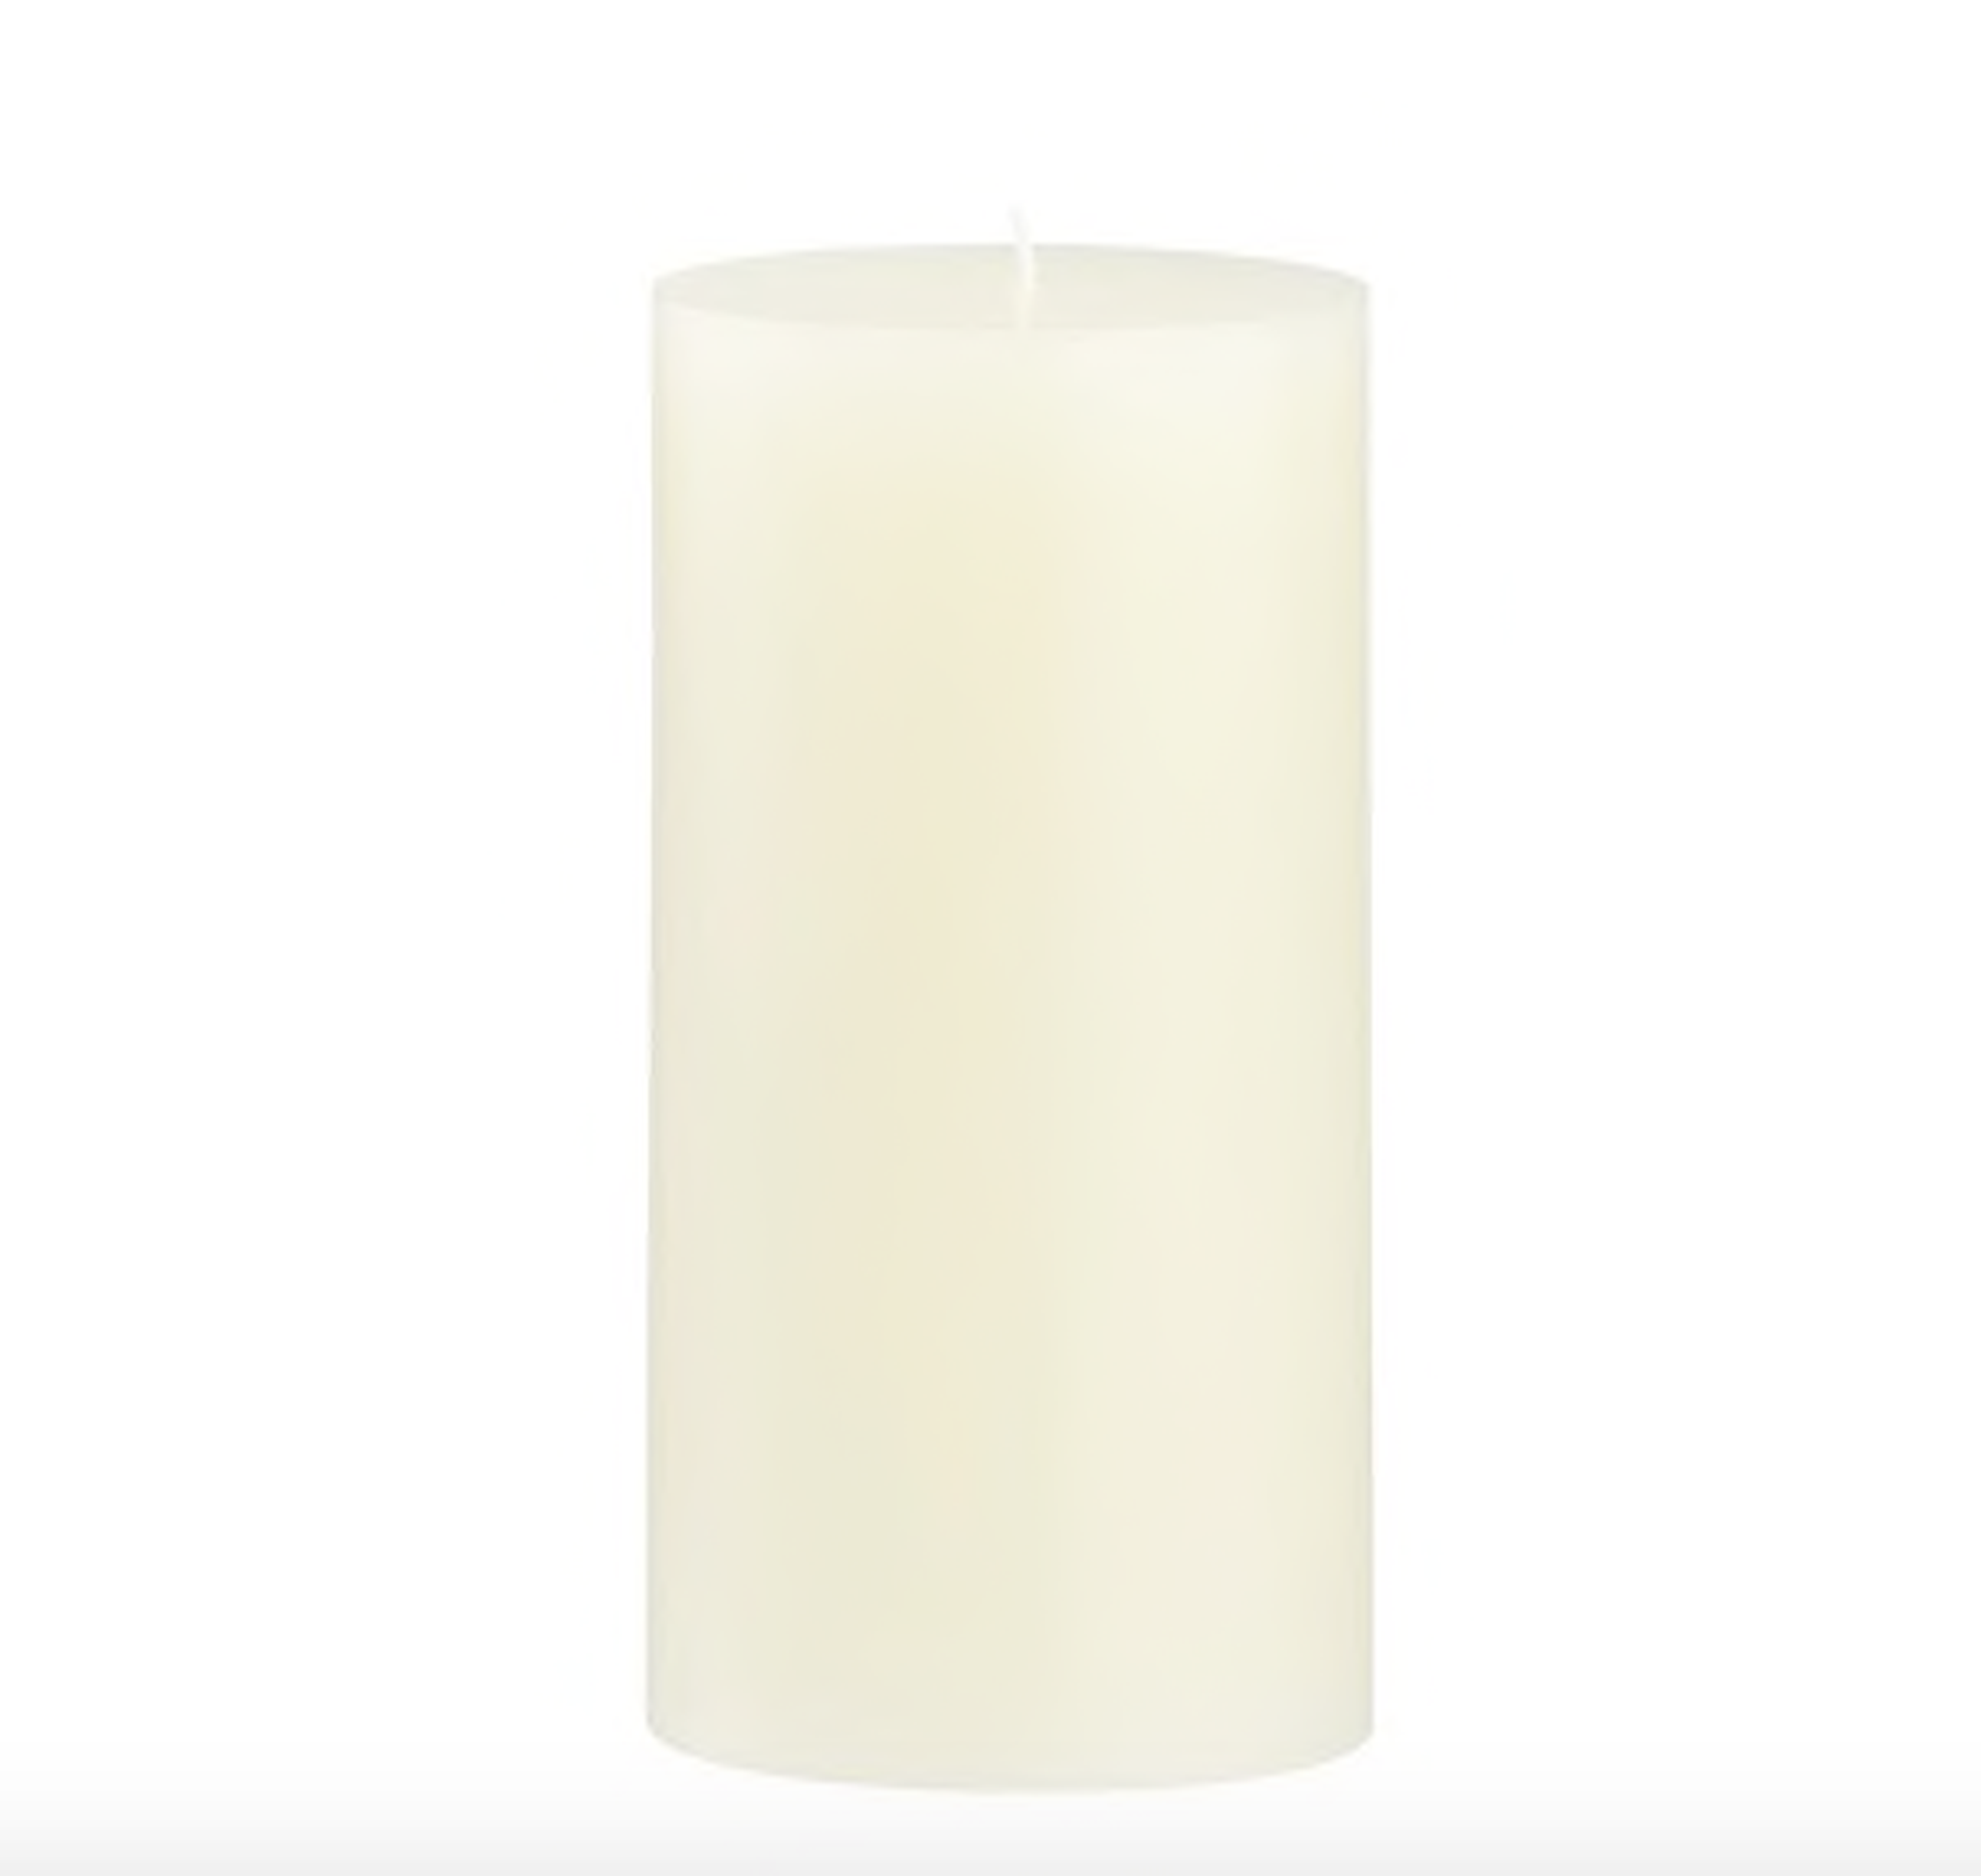 Ivory Pillar Candle 3x6 - Crate and Barrel